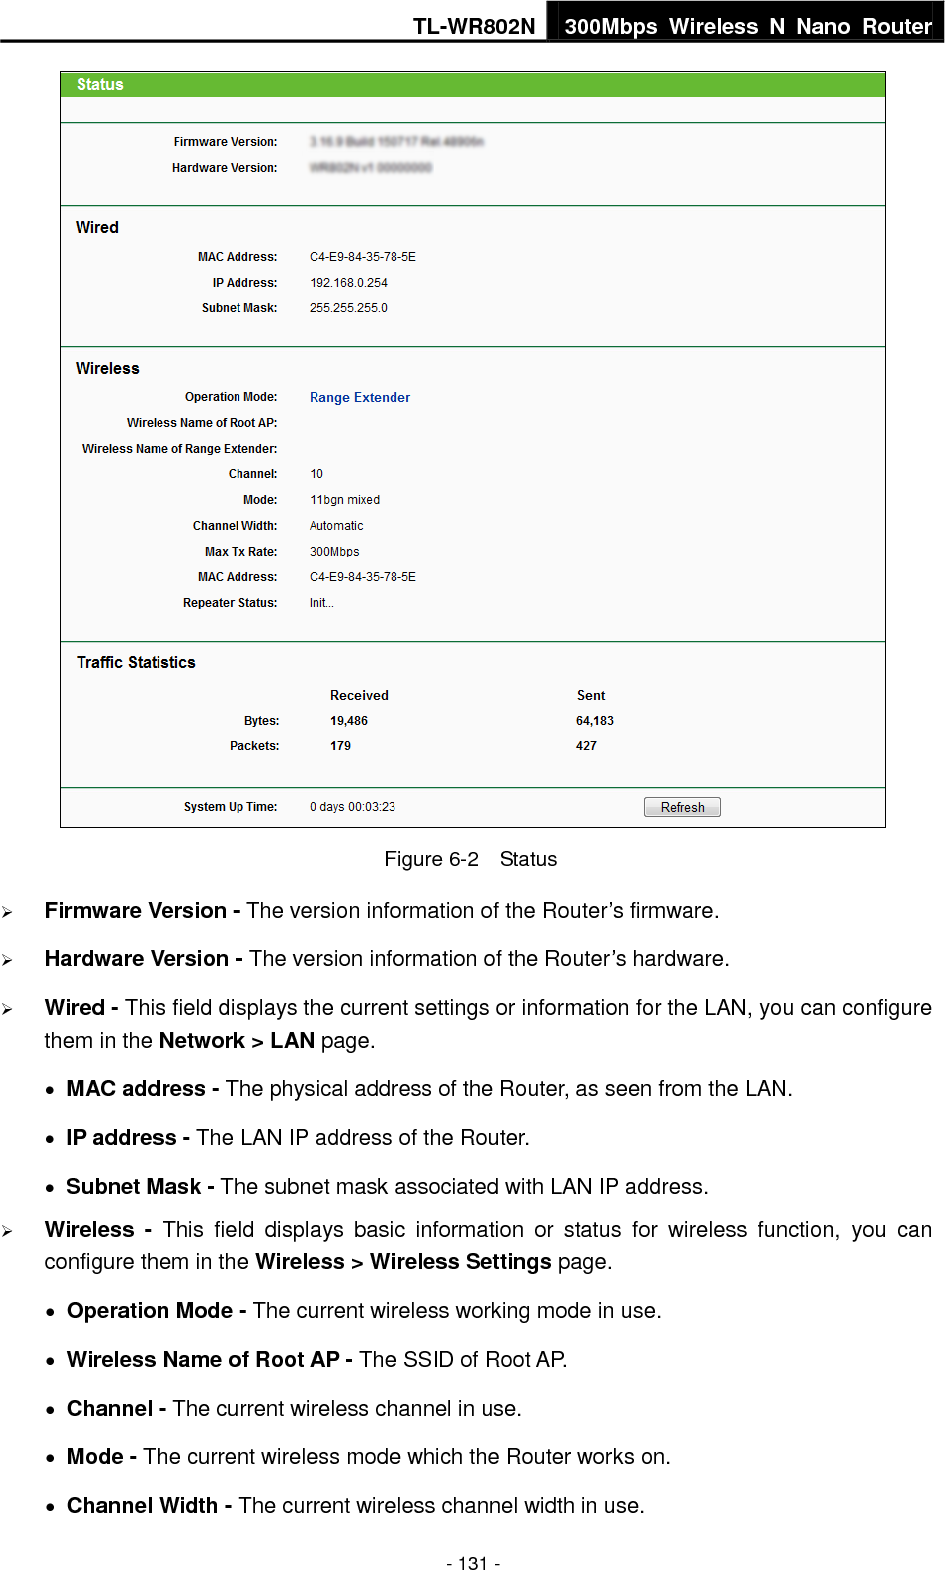 TL-WR802N 300Mbps  Wireless  N  Nano  Router  - 131 -  Figure 6-2  Status  Firmware Version - The version information of the Router’s firmware.  Hardware Version - The version information of the Router’s hardware.  Wired - This field displays the current settings or information for the LAN, you can configure them in the Network &gt; LAN page.    MAC address - The physical address of the Router, as seen from the LAN.  IP address - The LAN IP address of the Router.  Subnet Mask - The subnet mask associated with LAN IP address.  Wireless -  This  field  displays  basic  information  or  status  for  wireless  function,  you  can configure them in the Wireless &gt; Wireless Settings page.    Operation Mode - The current wireless working mode in use.  Wireless Name of Root AP - The SSID of Root AP.  Channel - The current wireless channel in use.  Mode - The current wireless mode which the Router works on.  Channel Width - The current wireless channel width in use. 